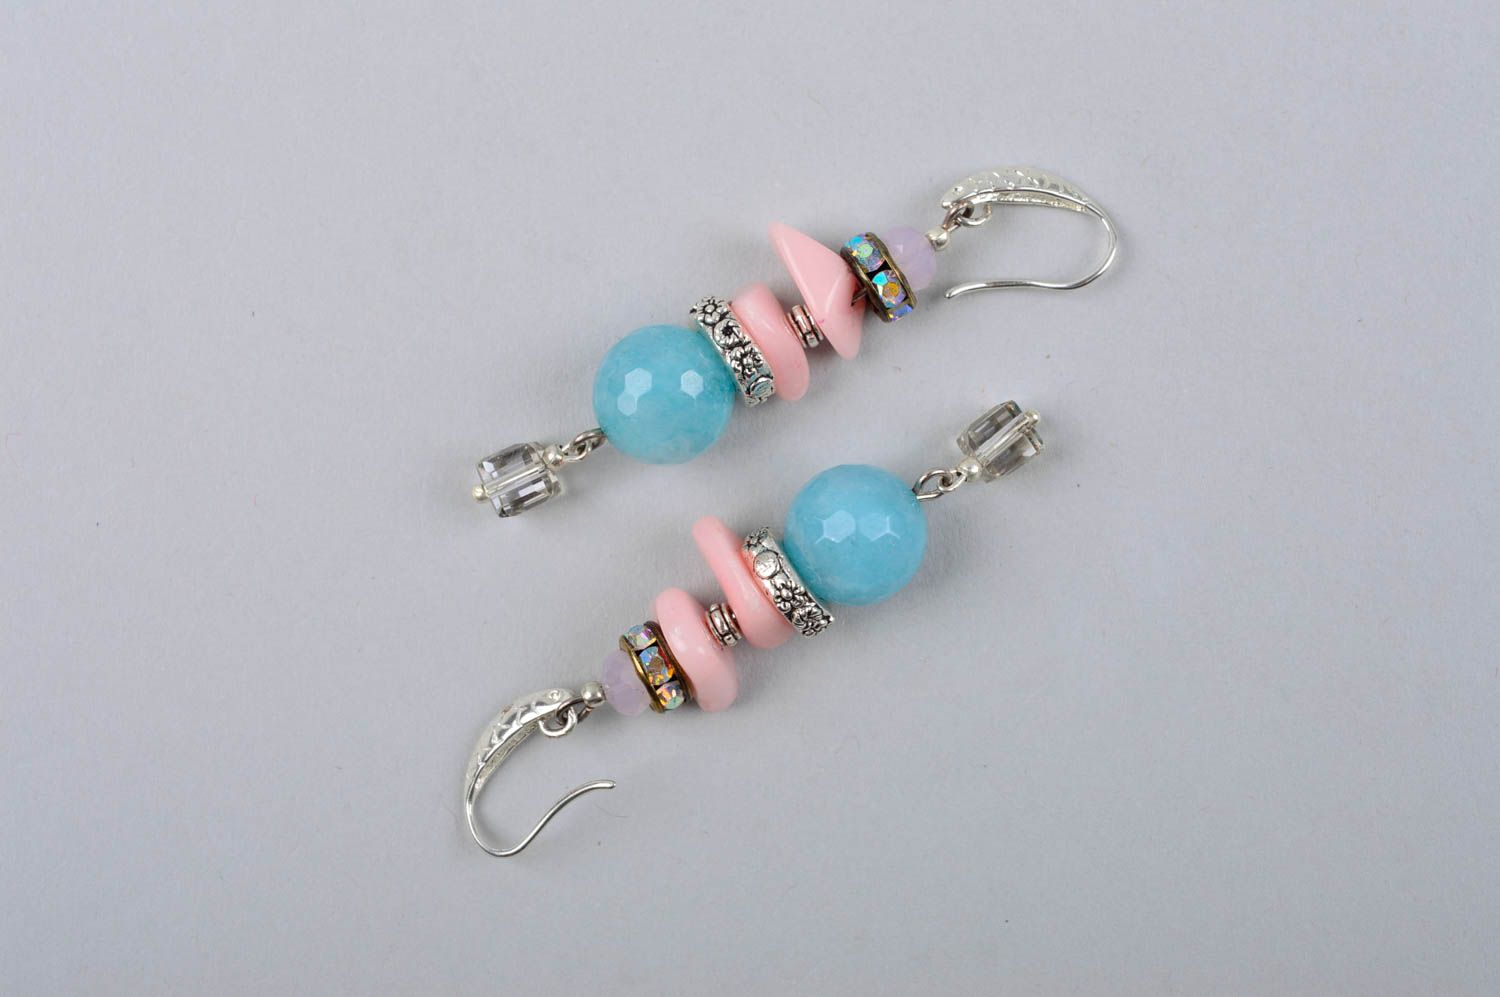 Designer accessory handmade earrings with agate pendants fashion jewelry photo 5